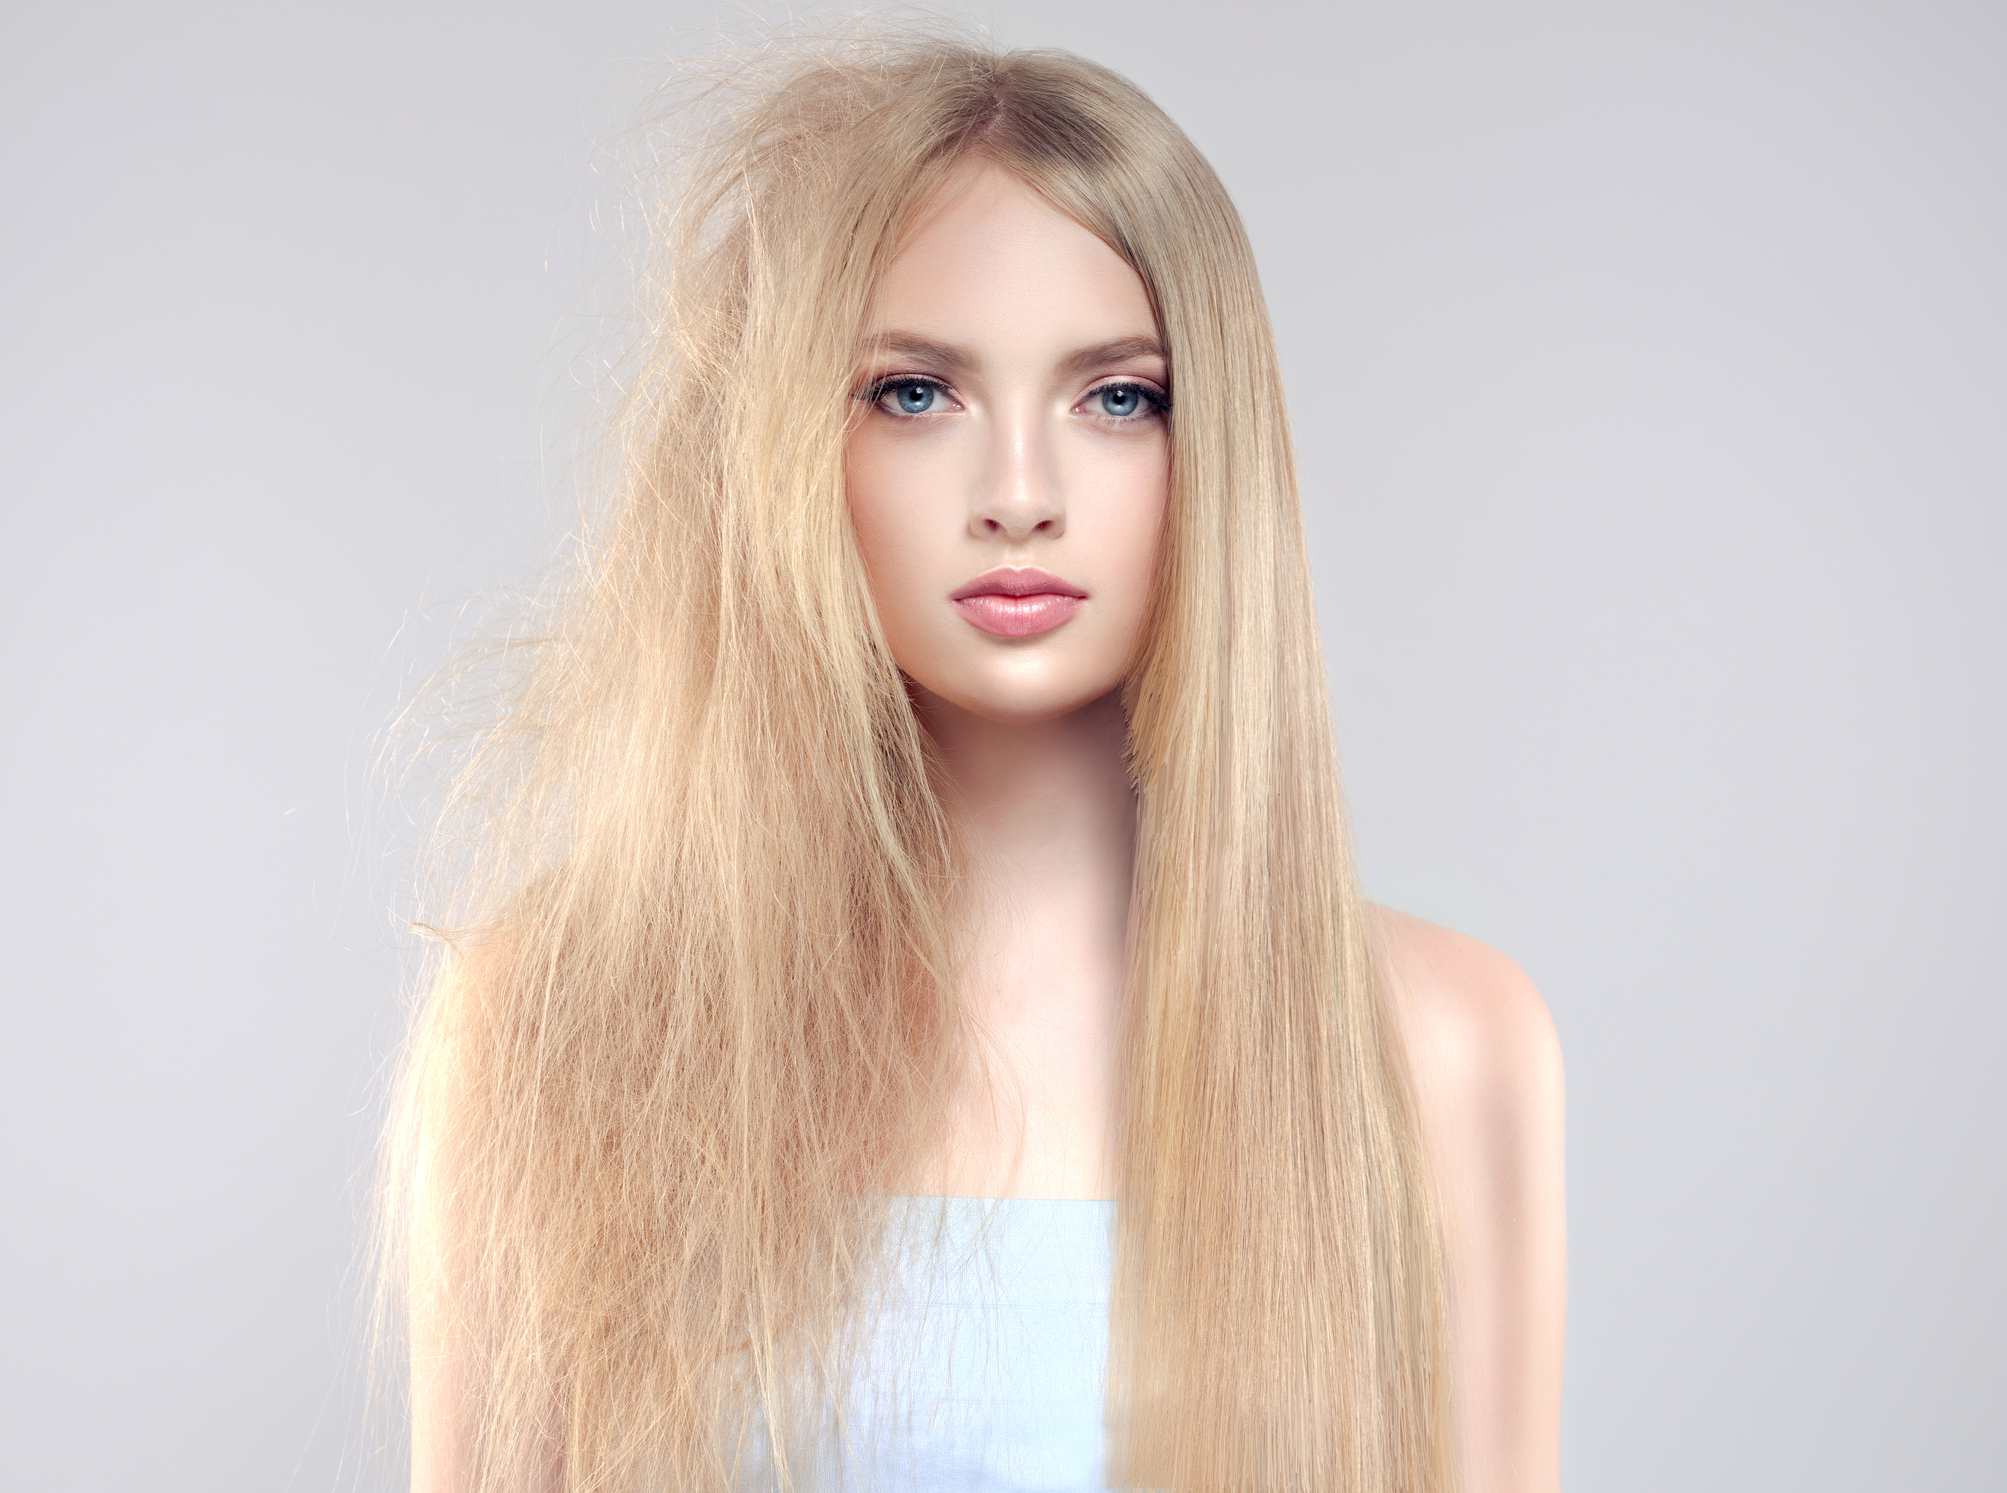 HOW TO FIX FRIZZY HAIR – 5 PROVEN WAYS TO PREVENT AND REPAIR FRIZZY HAIR |  juliArt